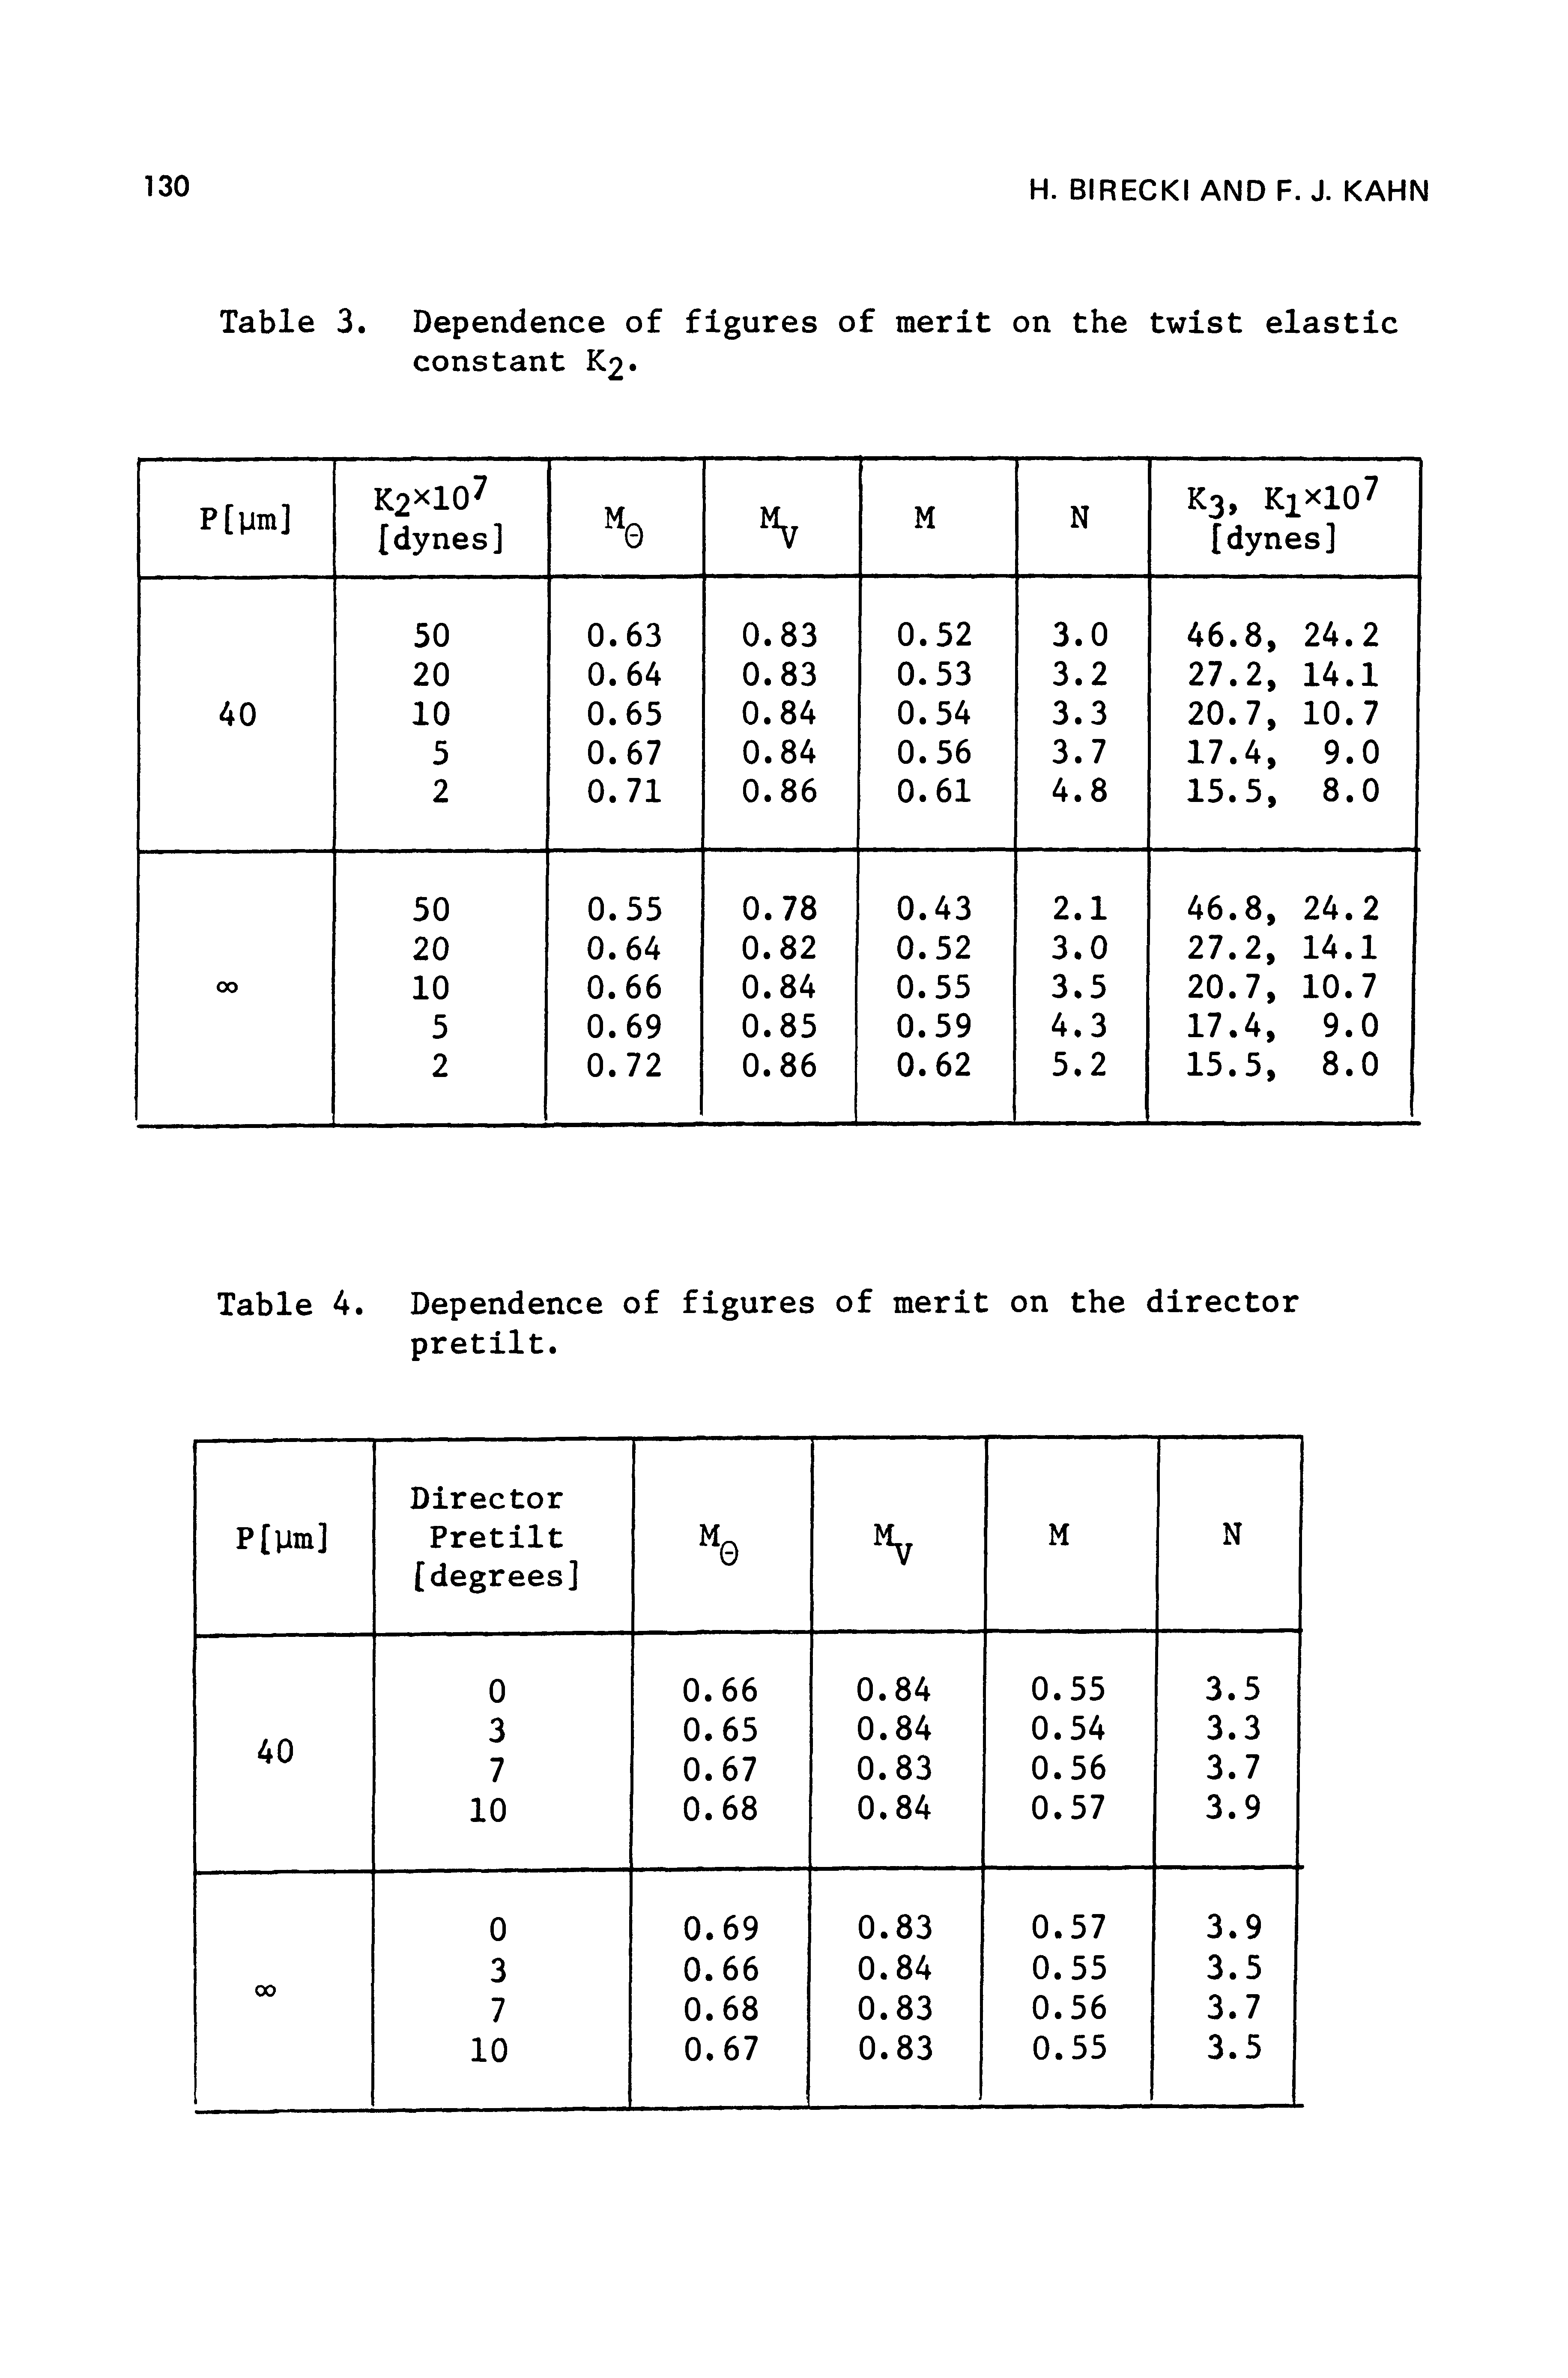 Table 3. Dependence of figures of merit on the twist elastic constant K2.